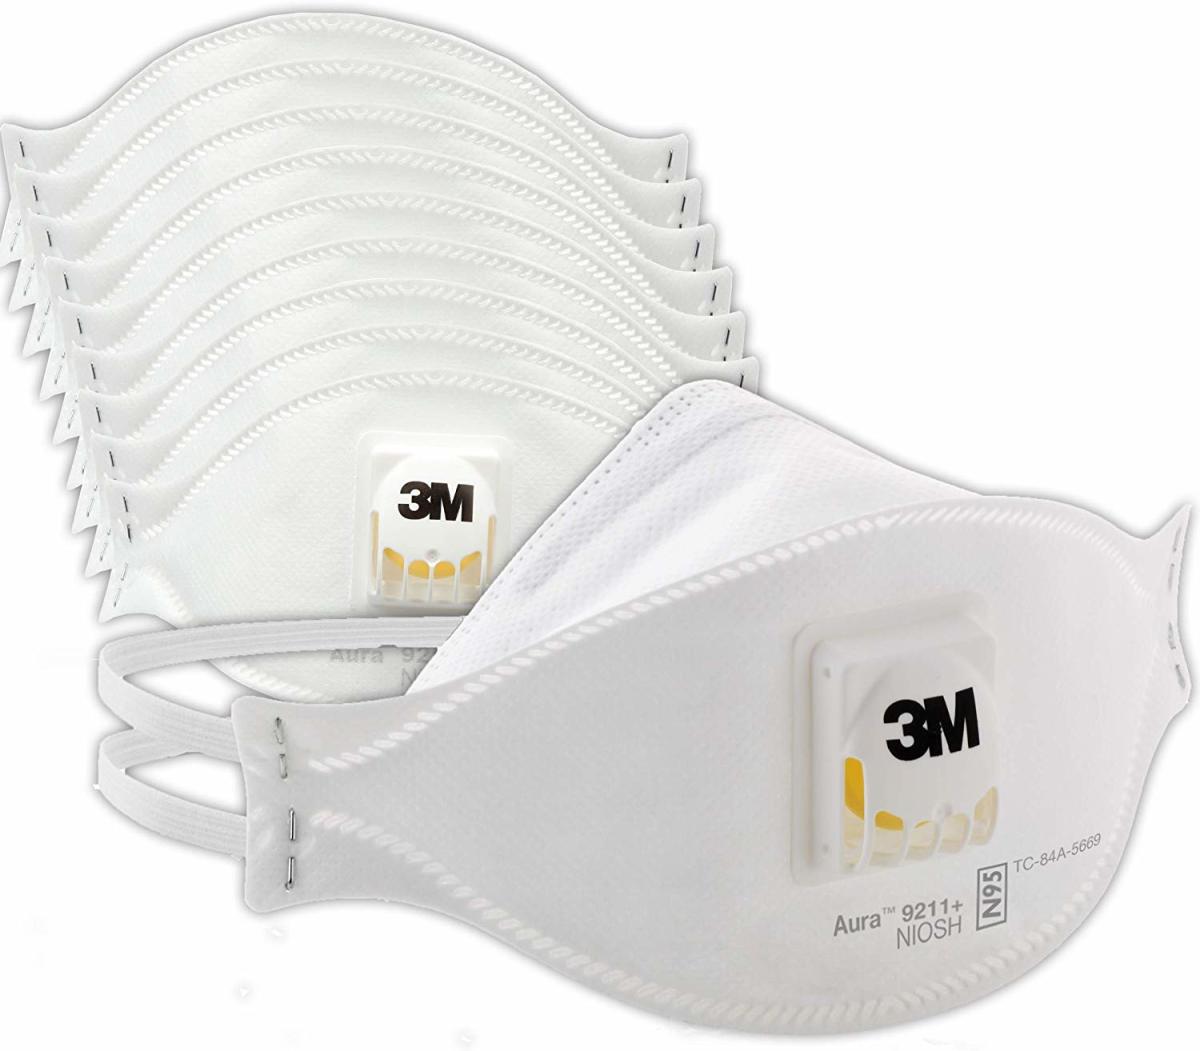 N95 masks are a good choice if you can find them